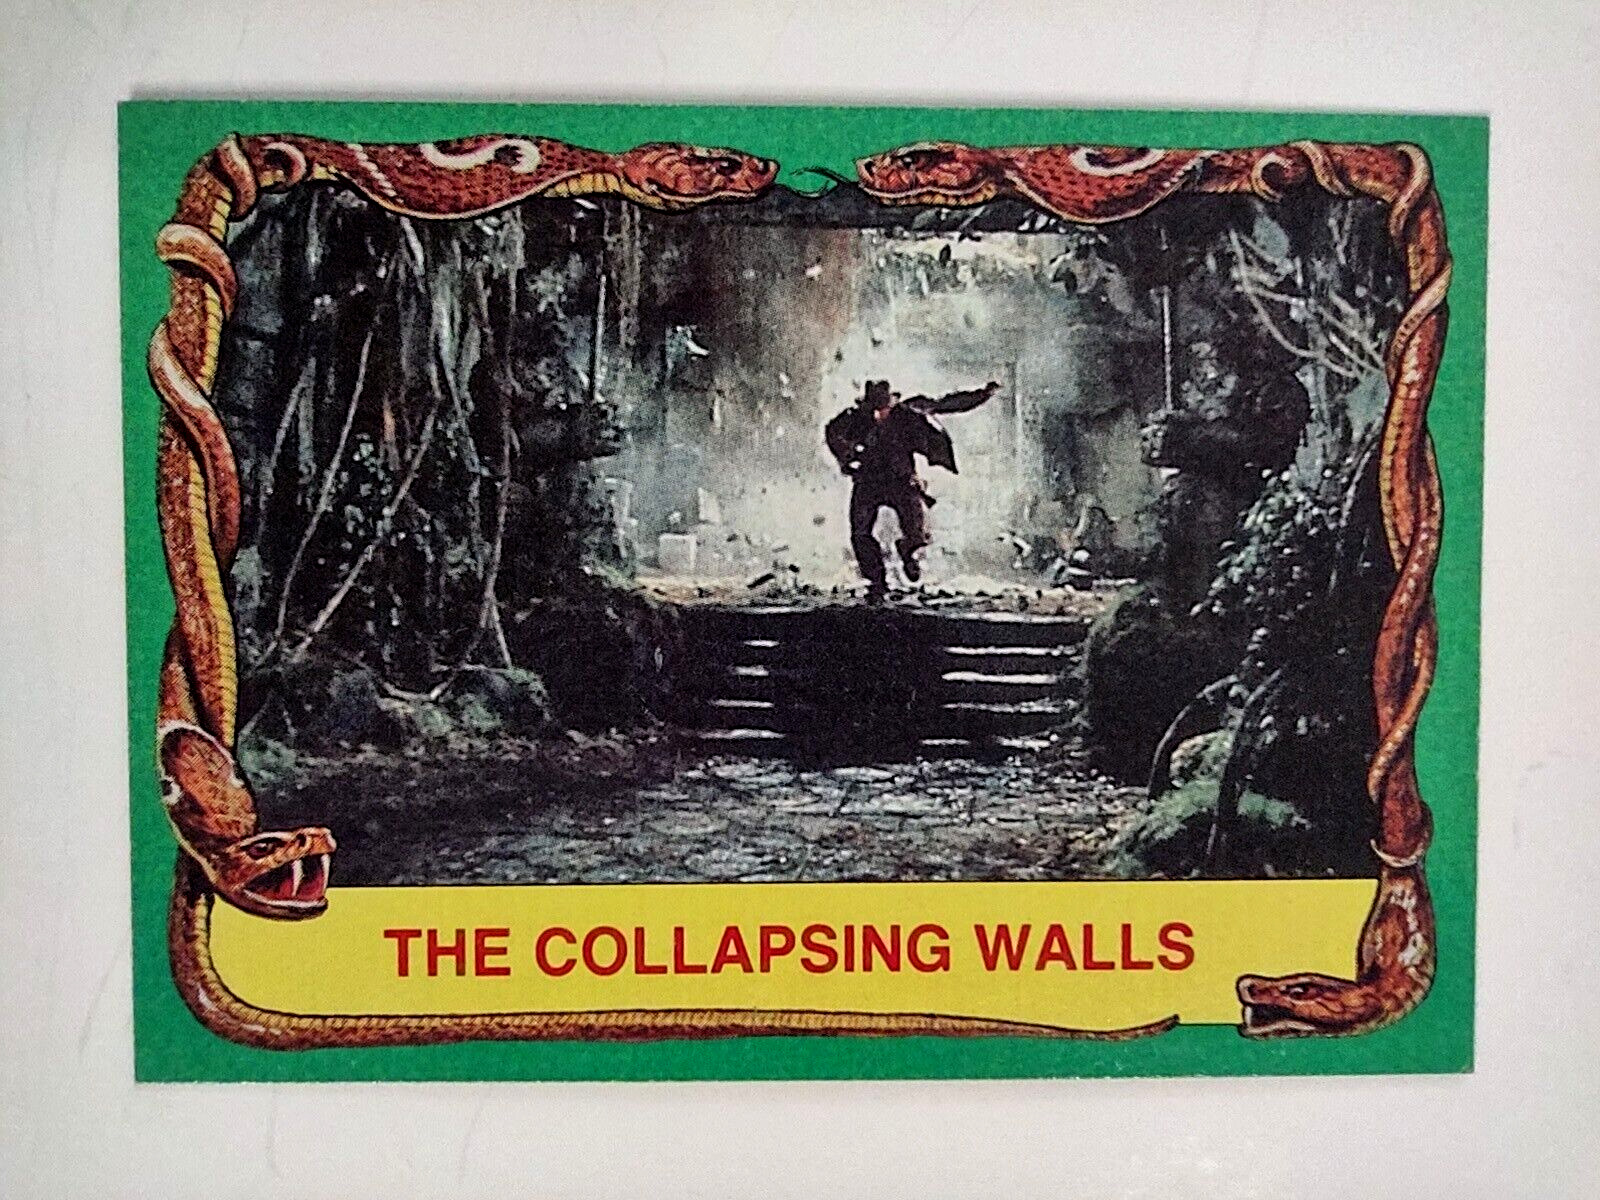 1981 Topps Raiders of the Lost Ark #11 The Collapsing Walls Indiana Jones